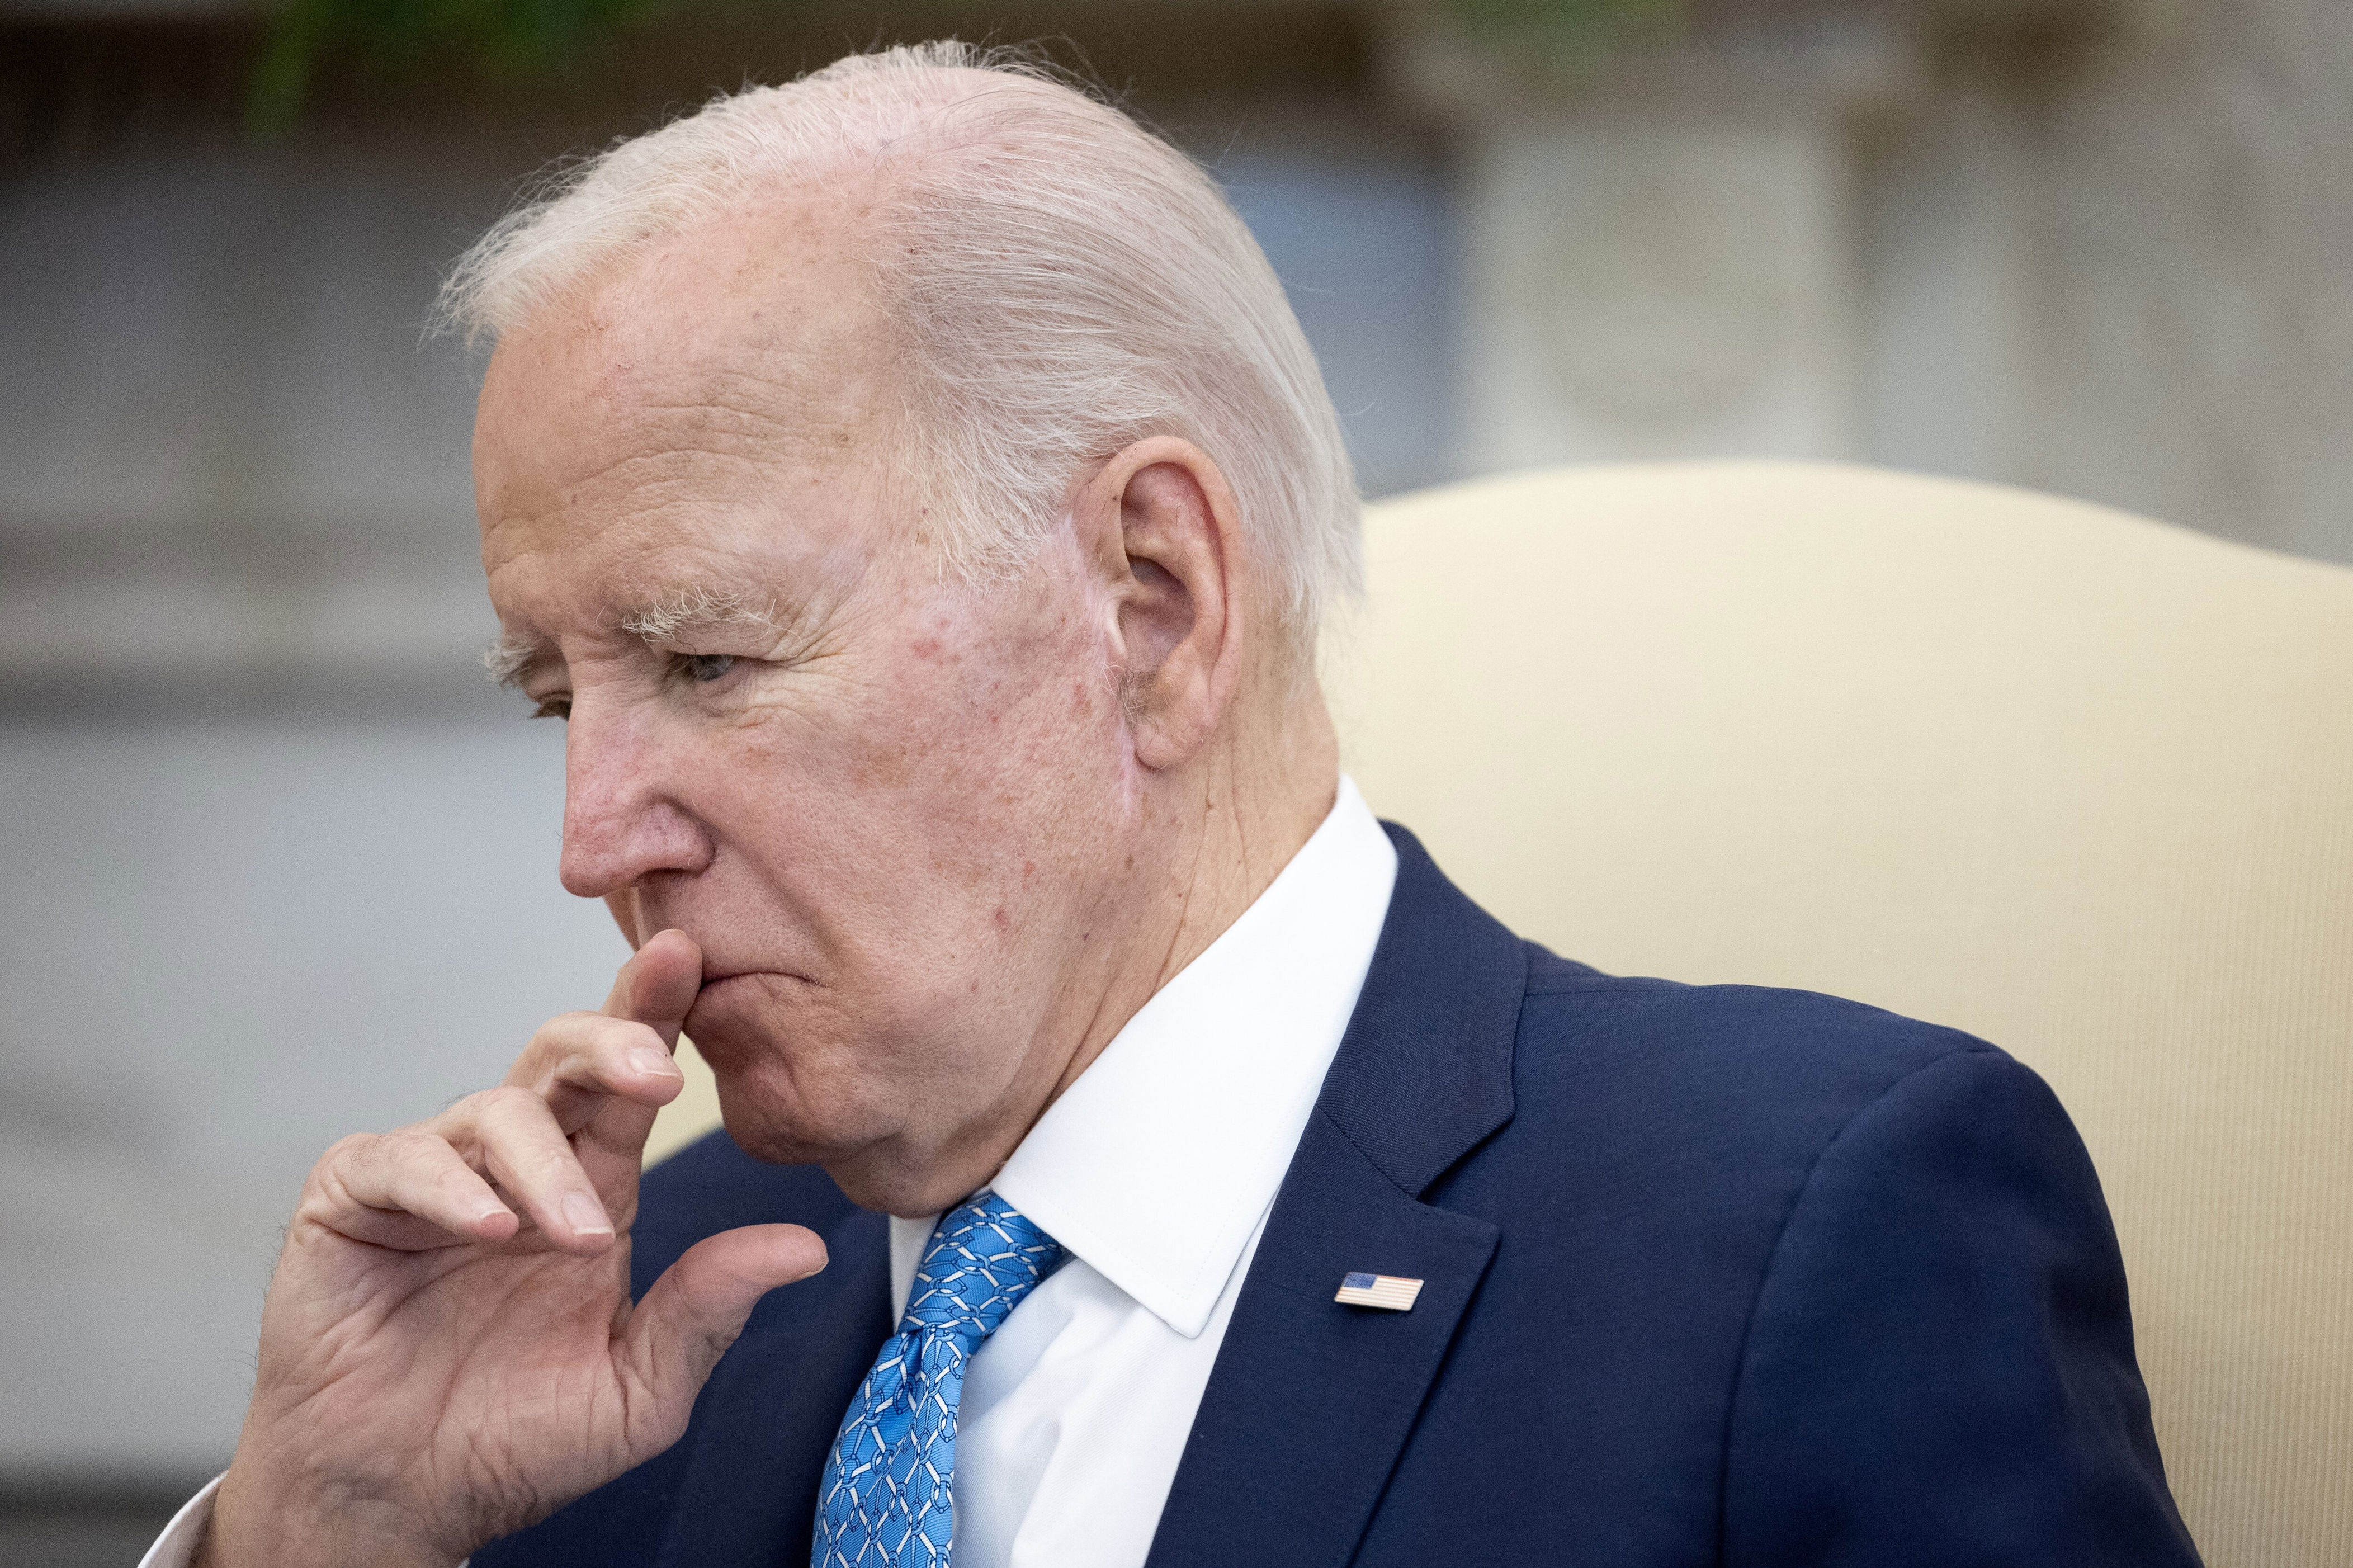 biden says netanyahu is making a ‘mistake’ in gaza, attack on aid workers ‘outrageous’